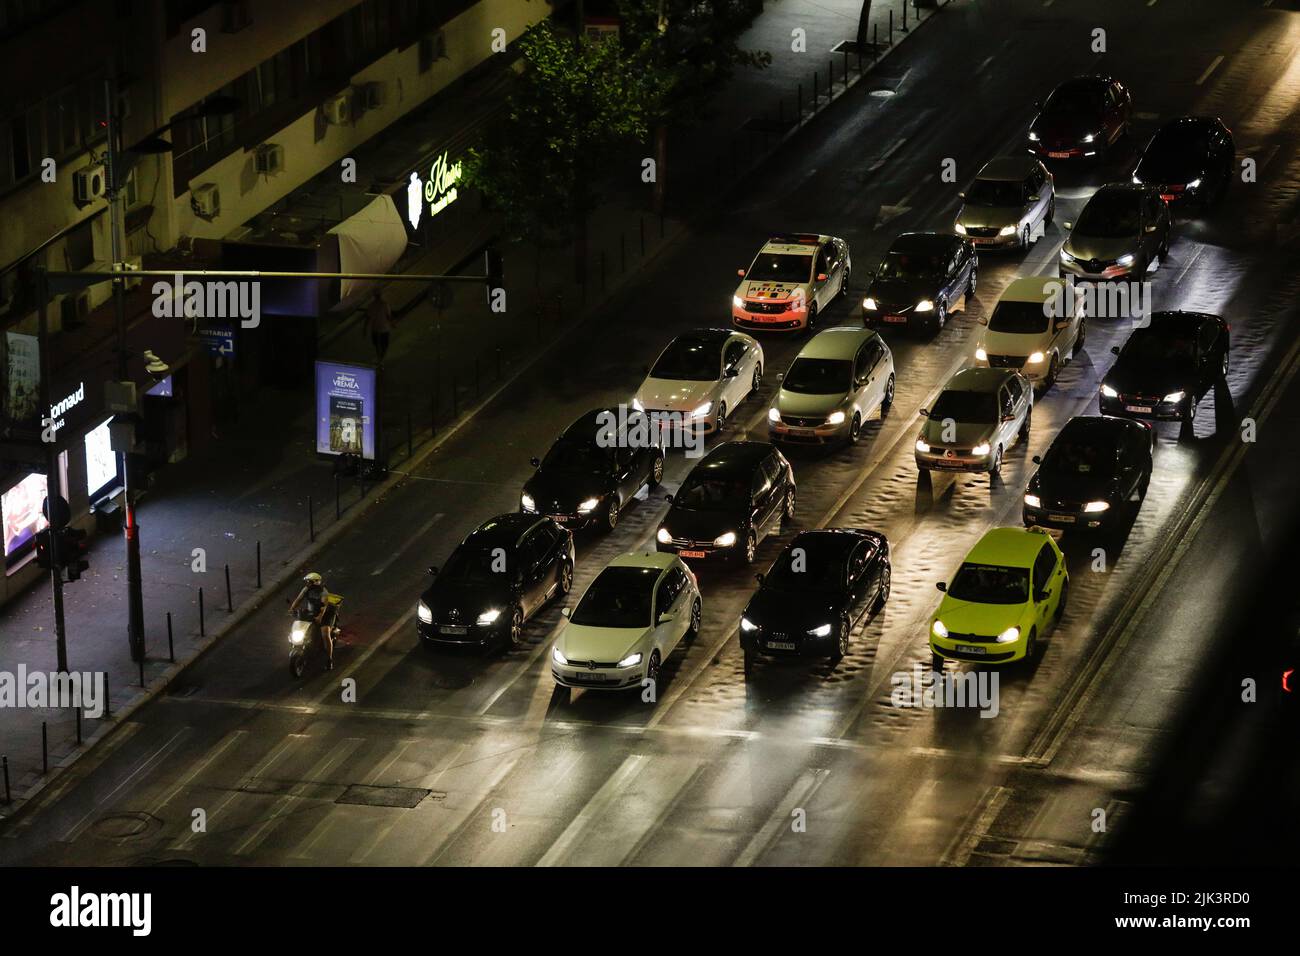 Bucharest, Romania - July 30, 2022: Cars wait at a red traffic light at night on Magheru boulevard in Bucharest. Stock Photo